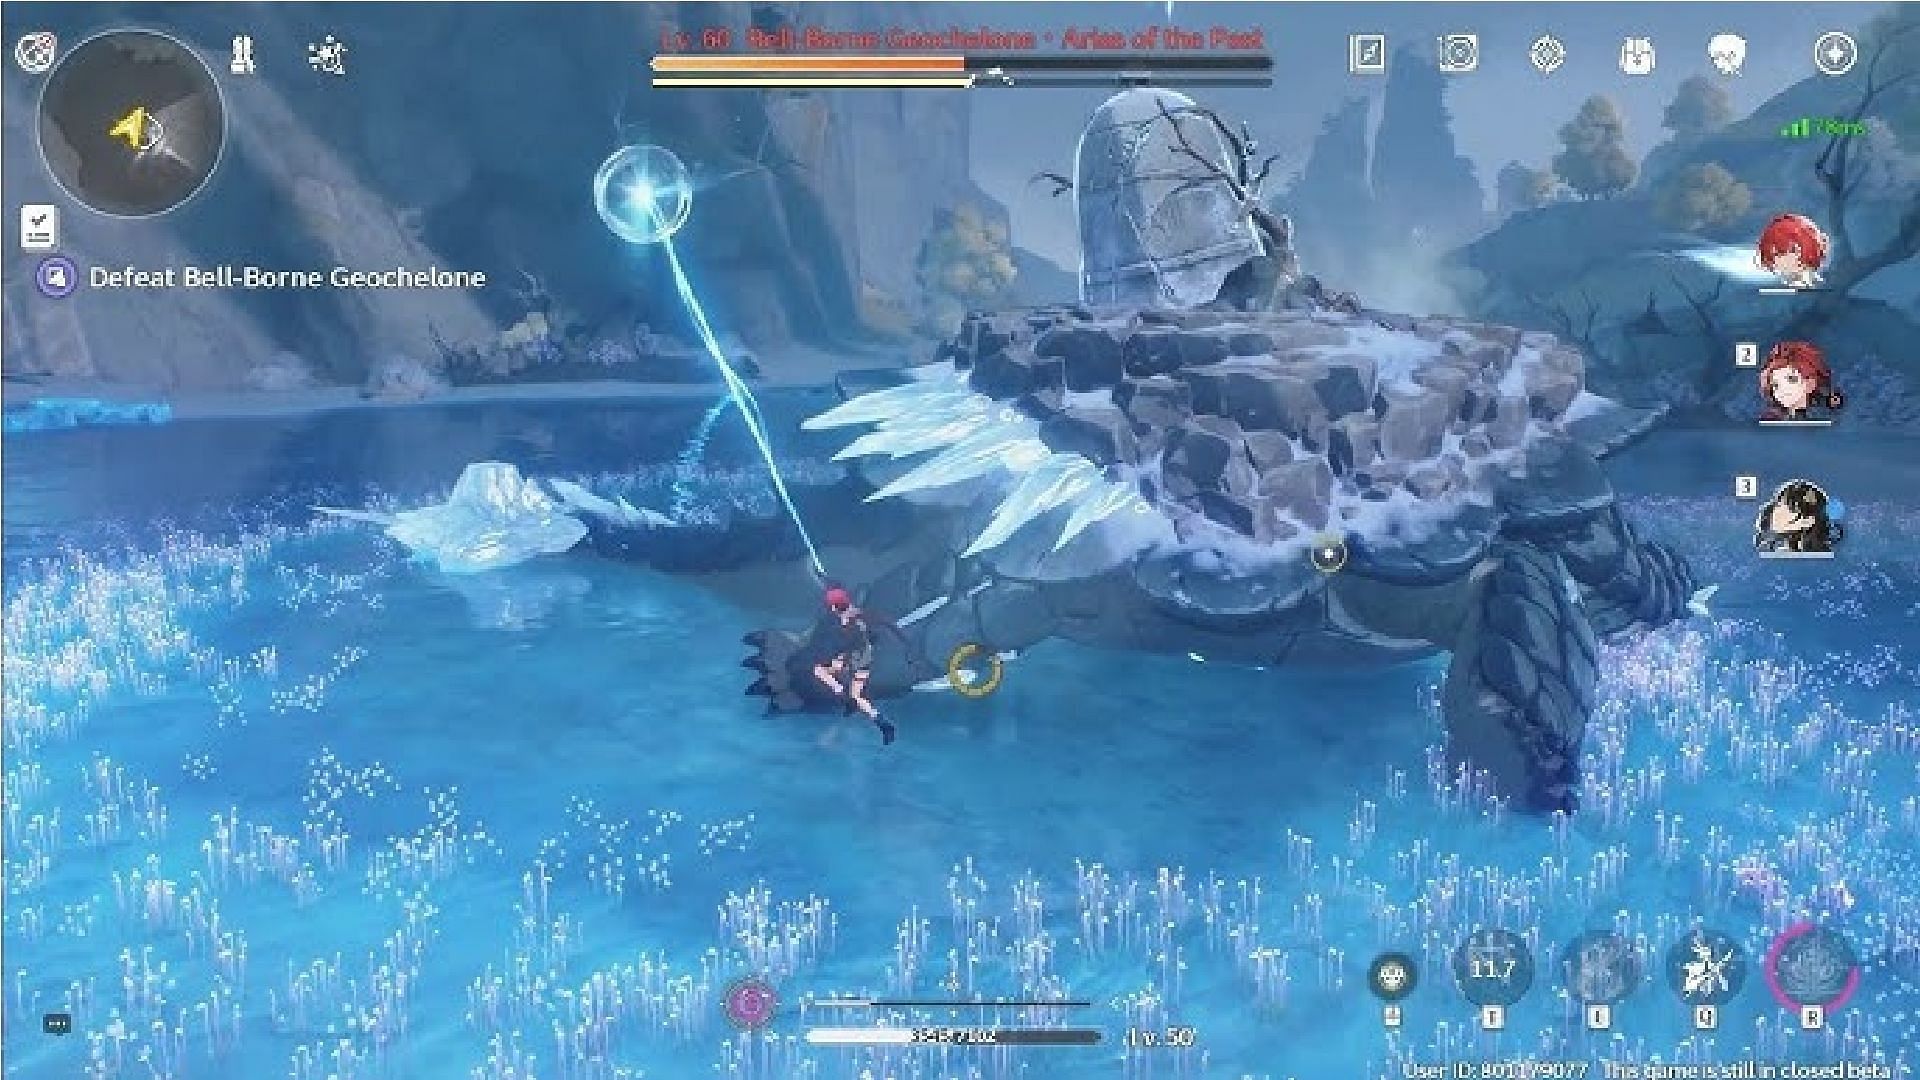 You can kill monsters and farm rewards by playing with your friends in Wuthering Waves (Image via Kuro Games)